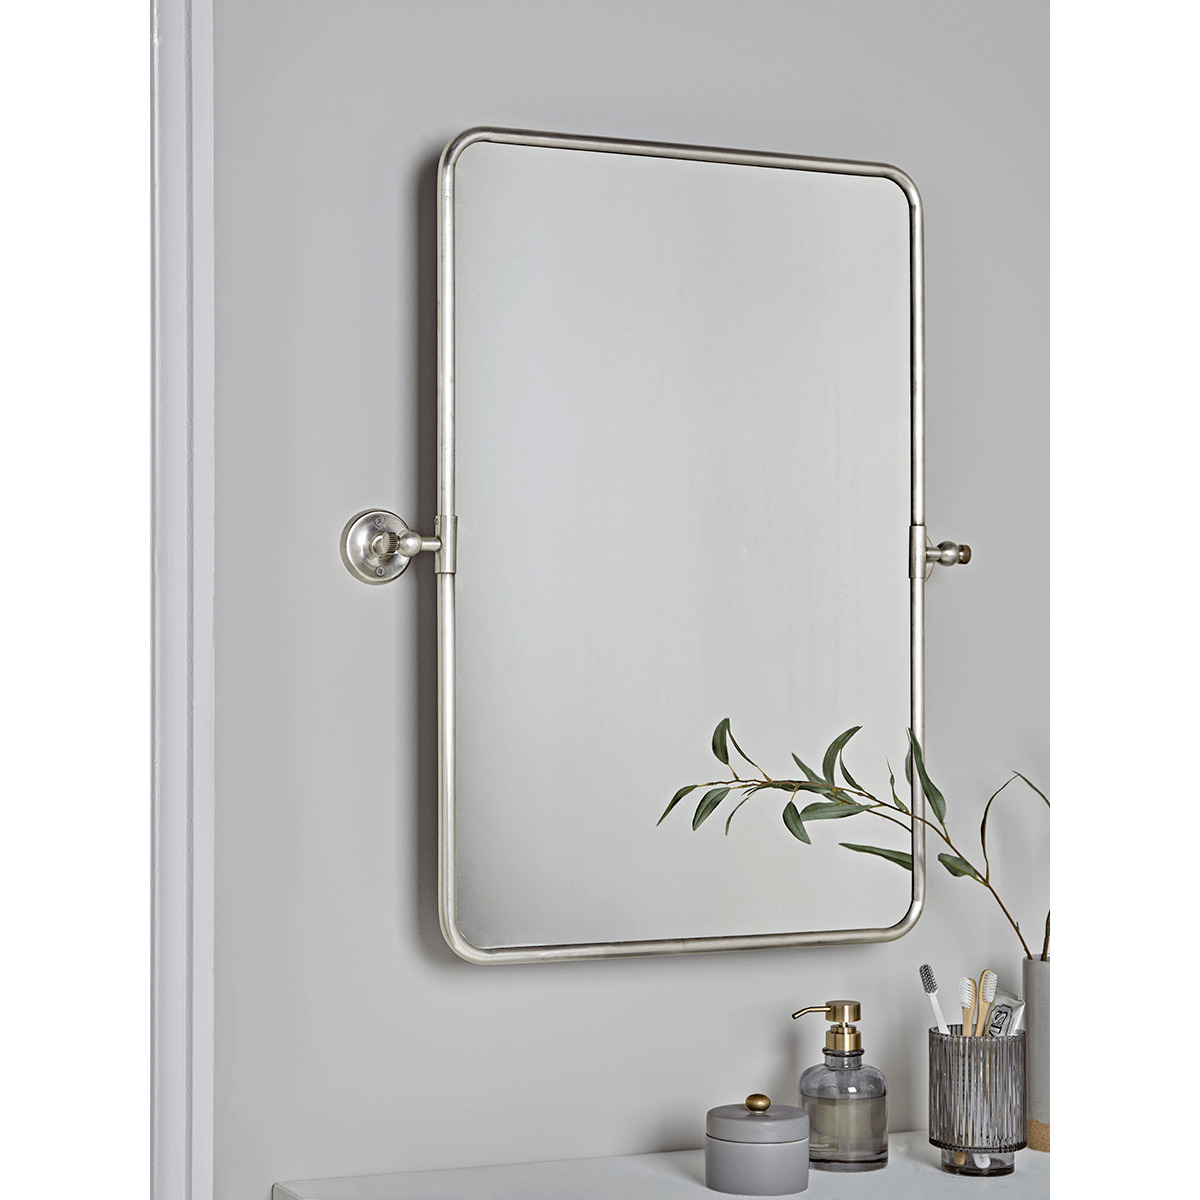 French Rectangle Wall Mirror - Antique Silver - image 1